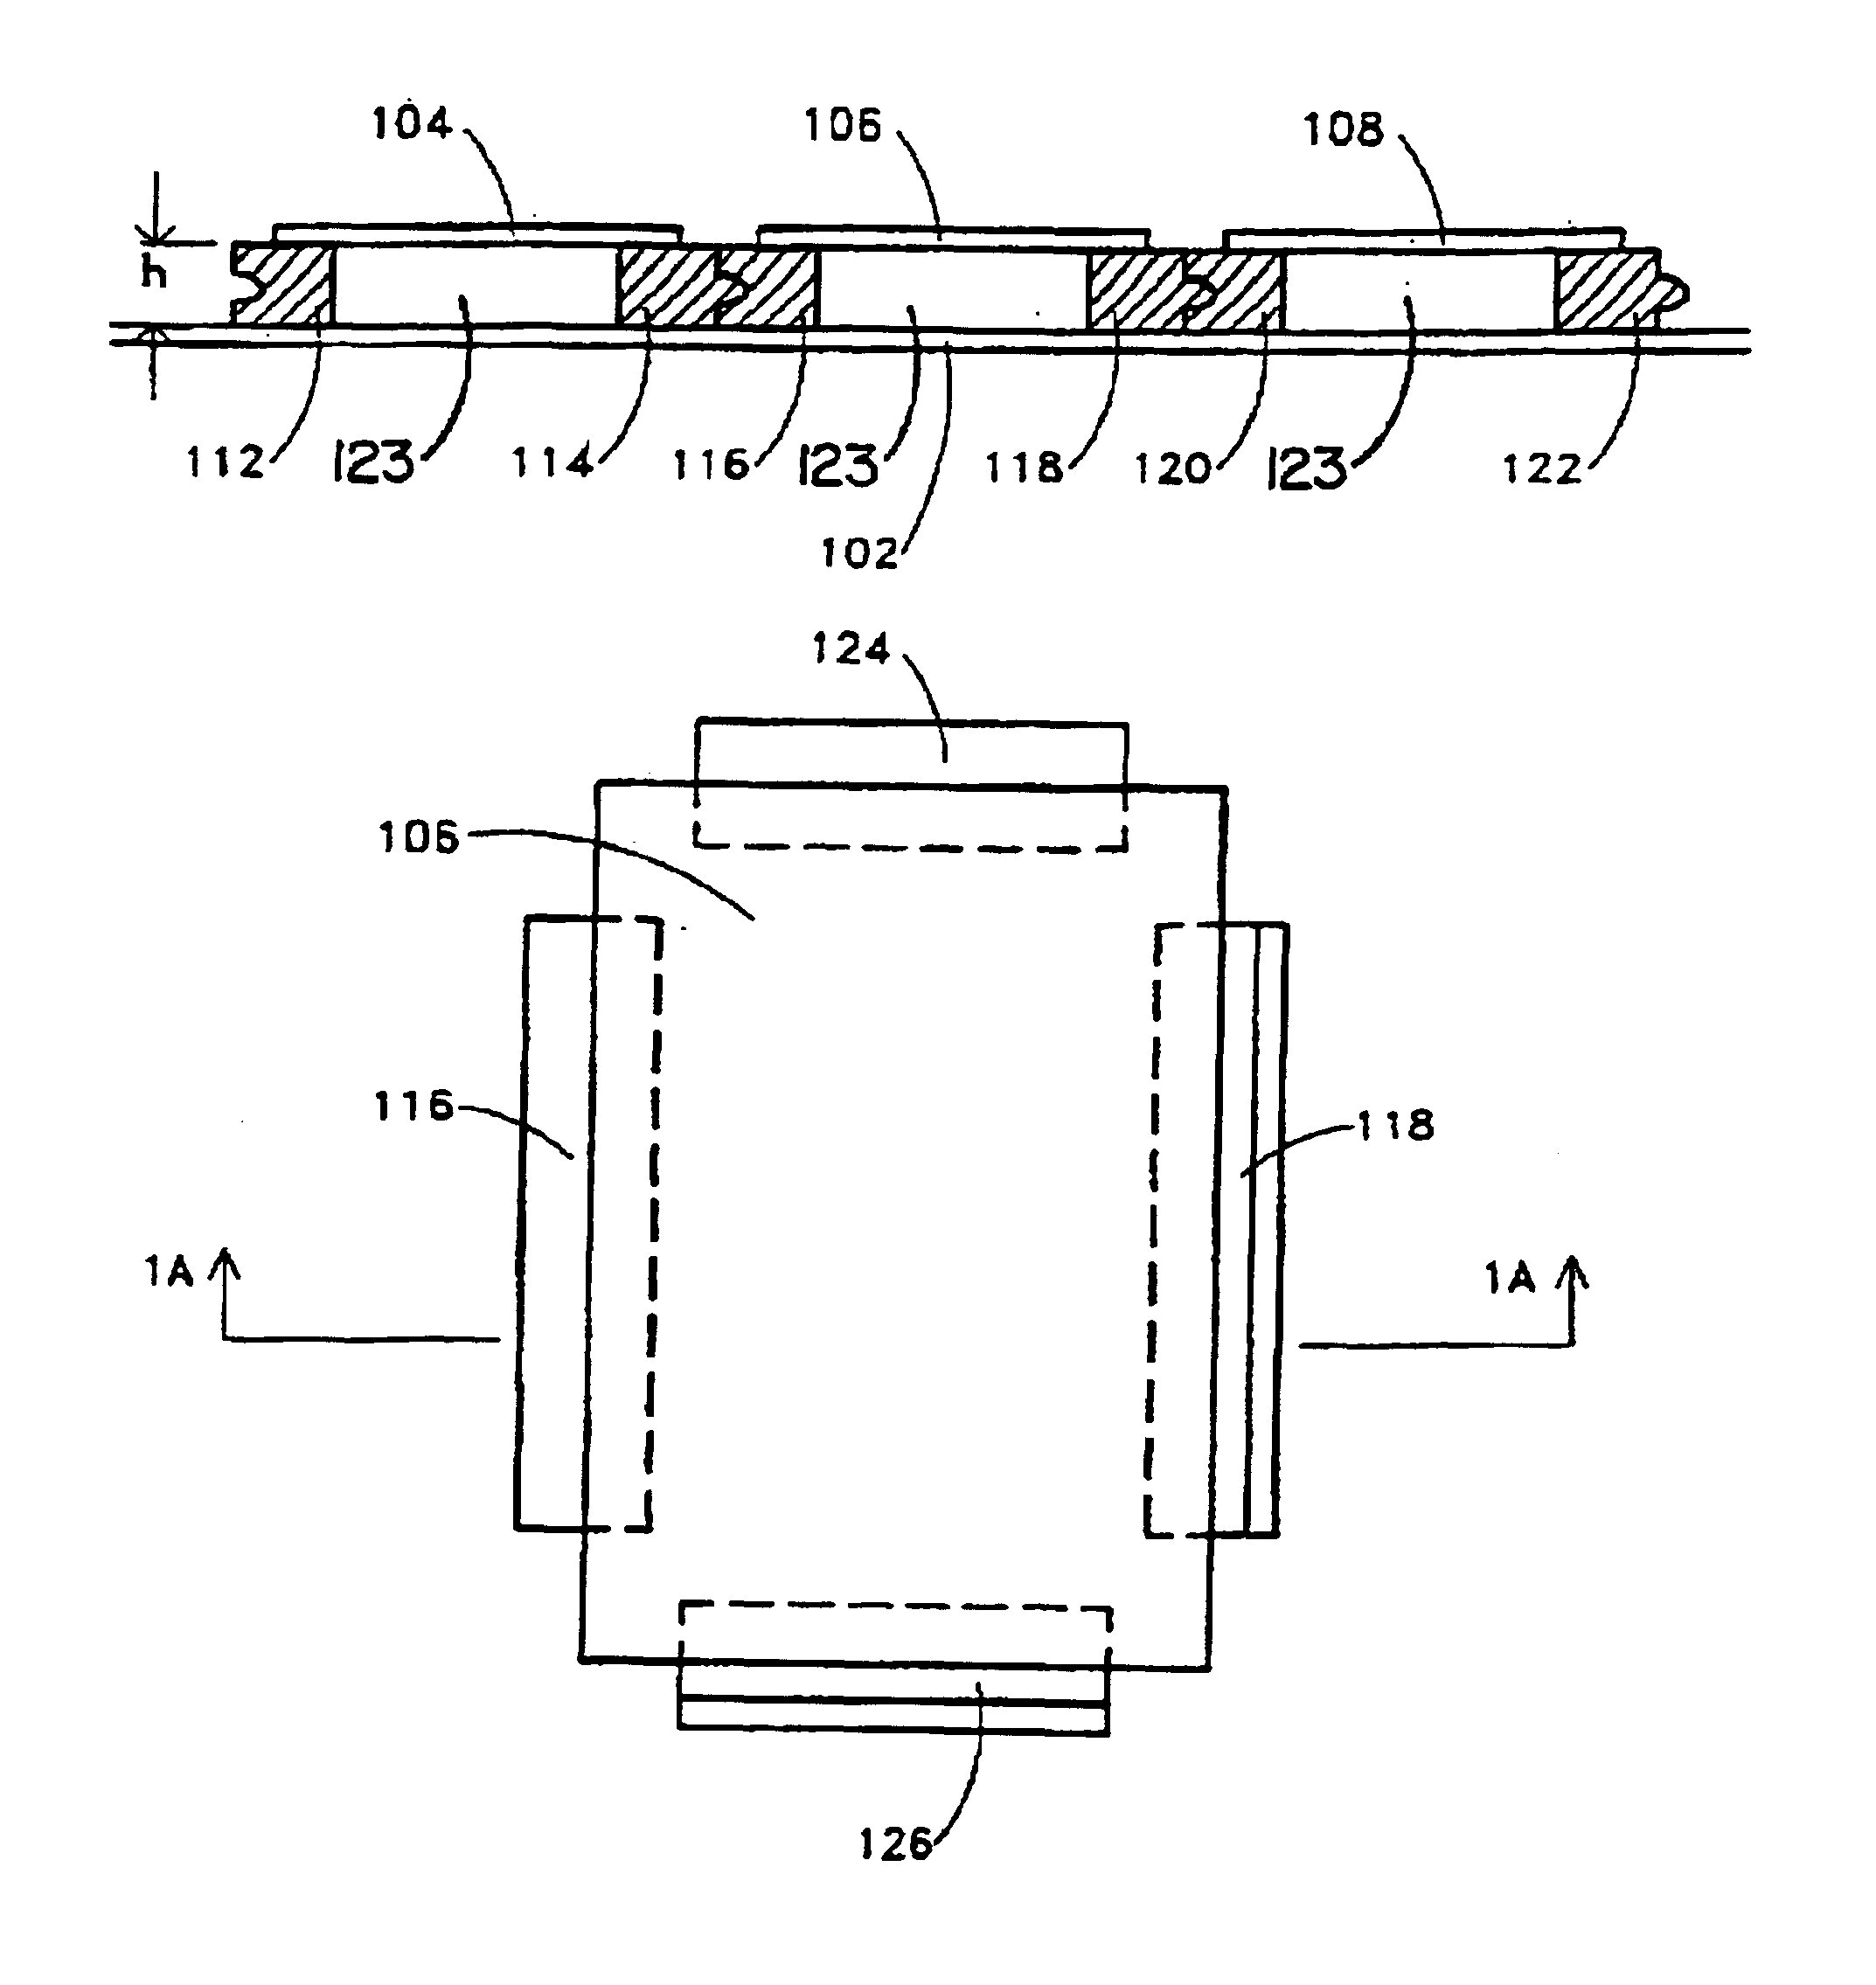 Lightweight, self-ballasting photovoltaic roofing assembly